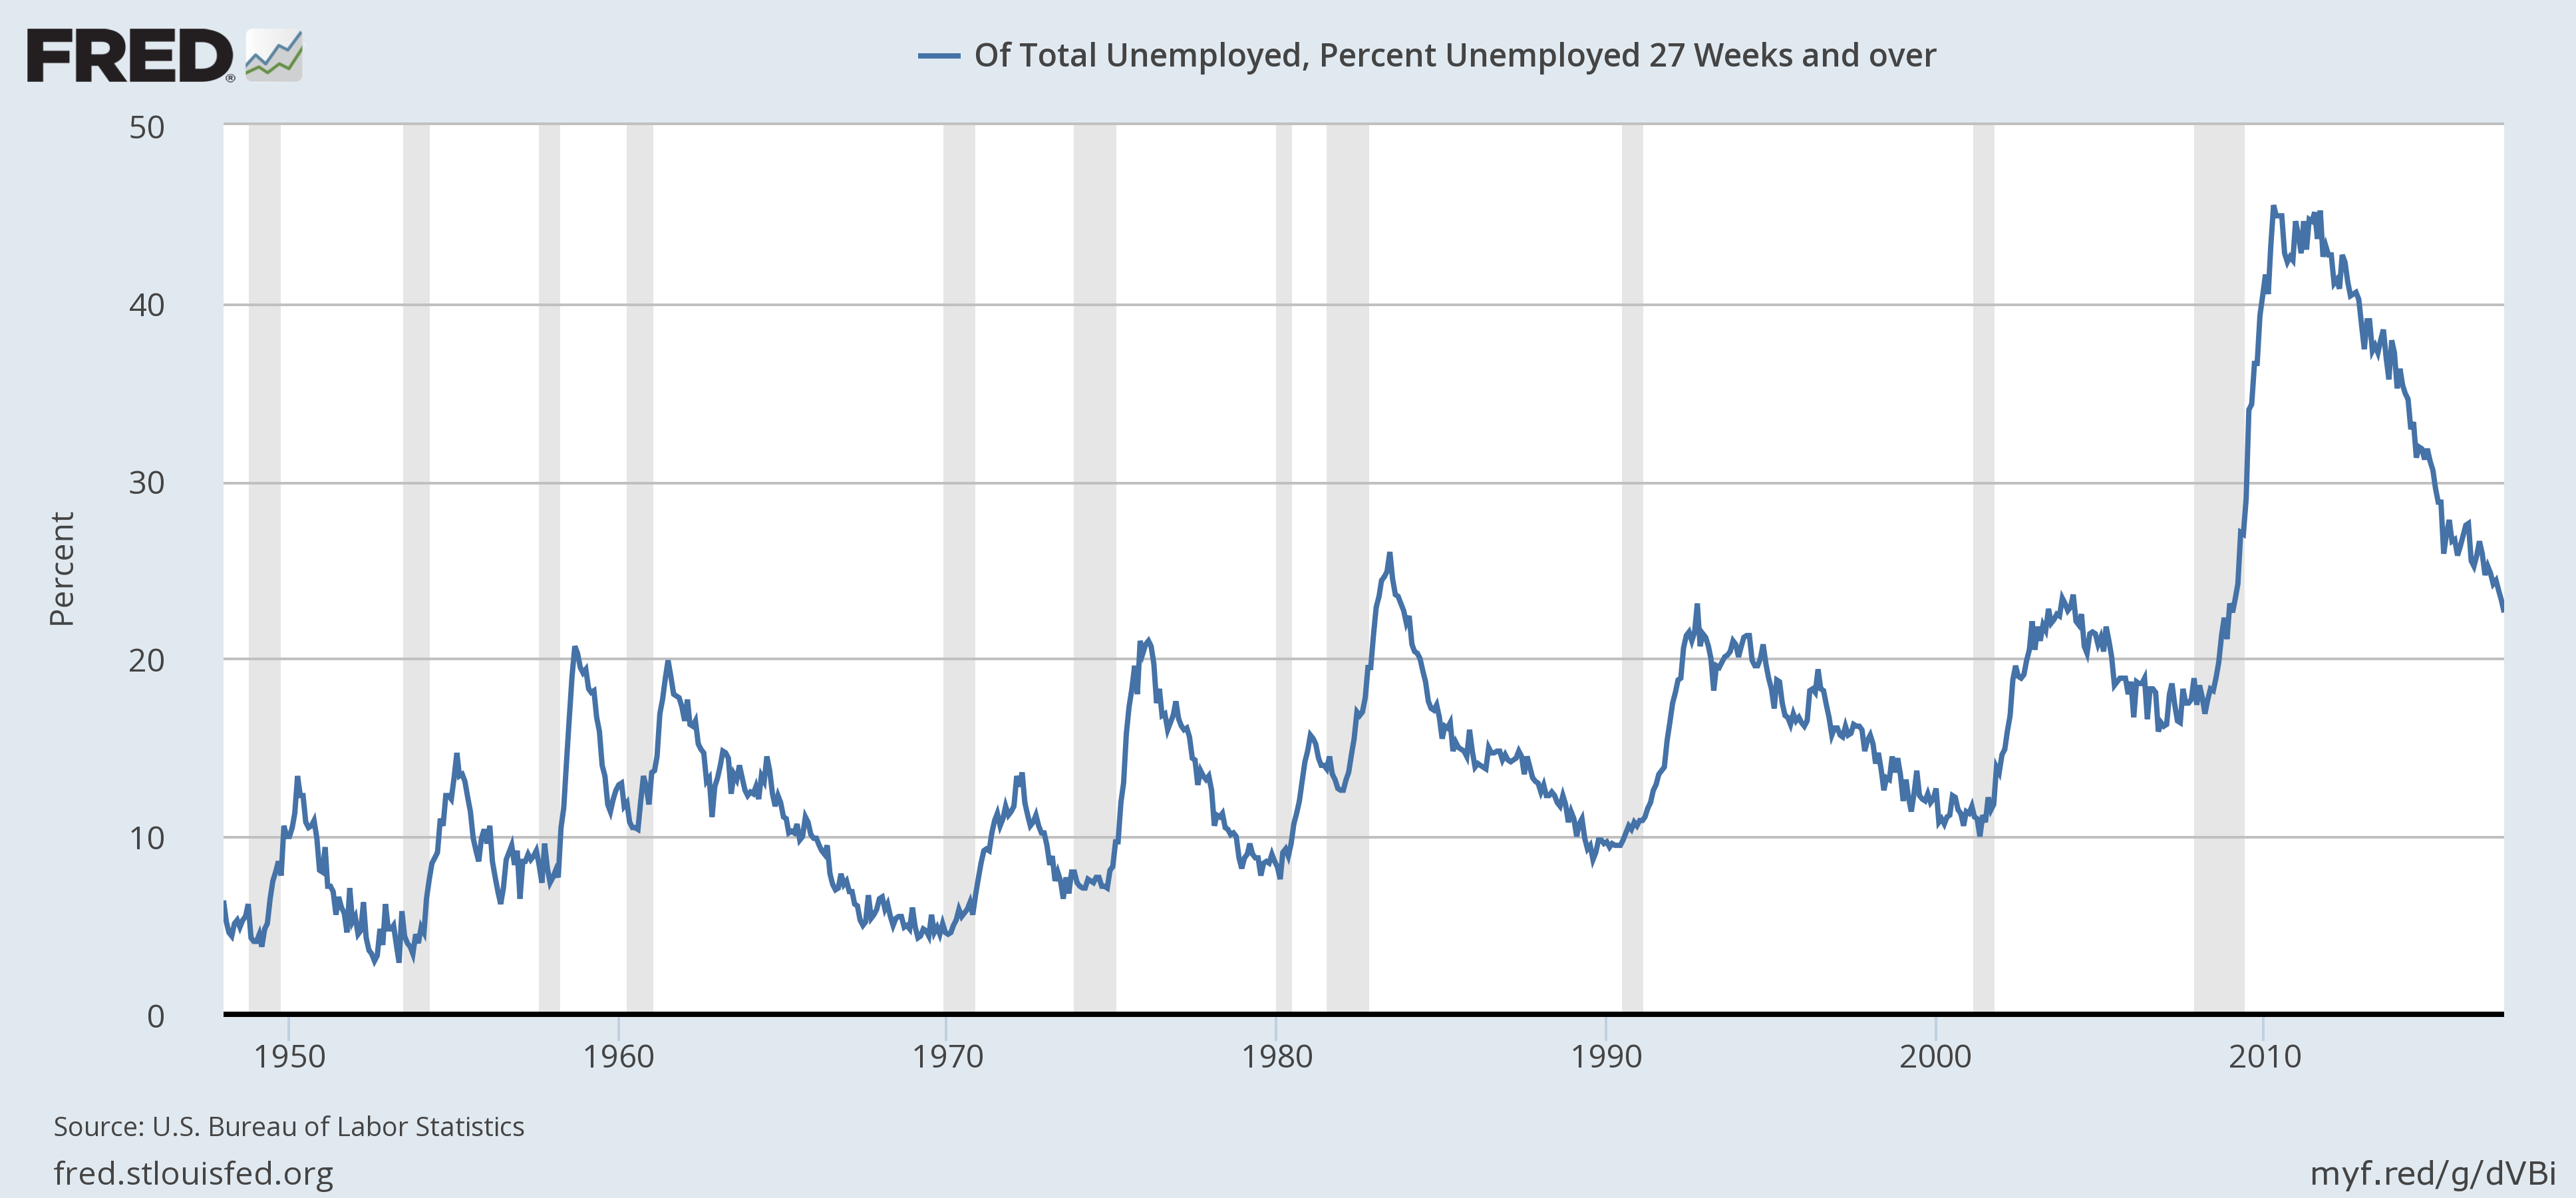 % Unemployed, 27 Weeks and Over 1950-2017